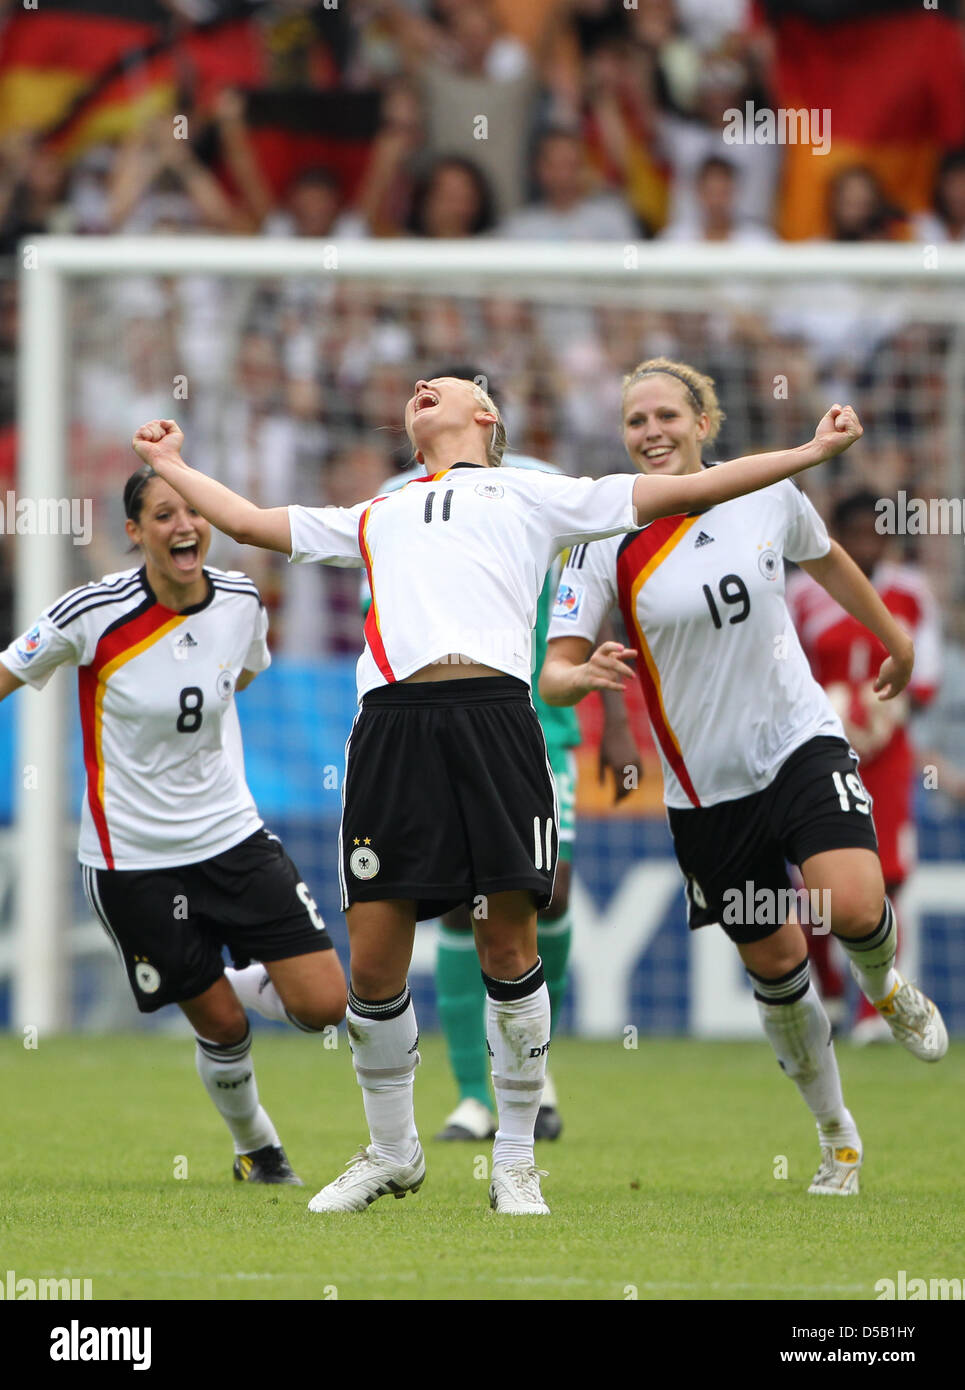 cirkulation Pengeudlån whisky German players Selina Wagner, Alexandra Popp and Kim Kulig (L to R)  celebrate the world championship after winning by 2:0 against Nigeria at  the final game of the FIFA U-20 Women's World